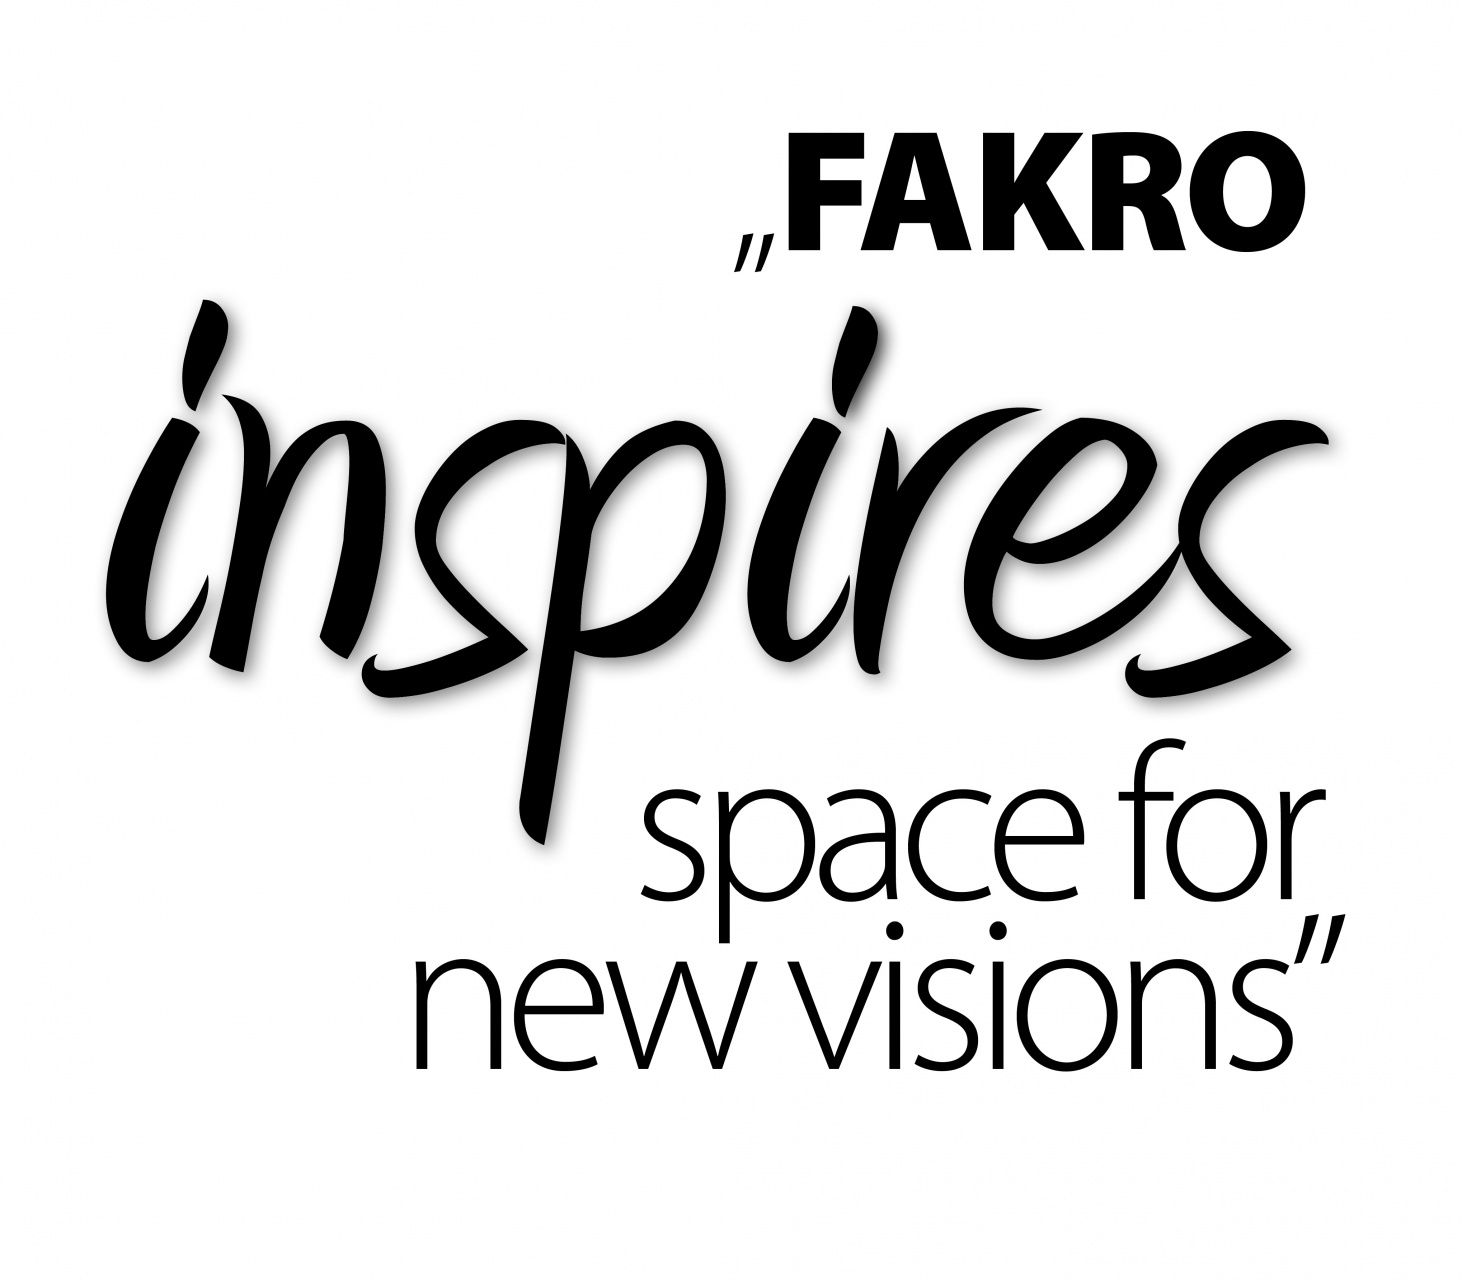 FAKRO inspires - space for new visions!